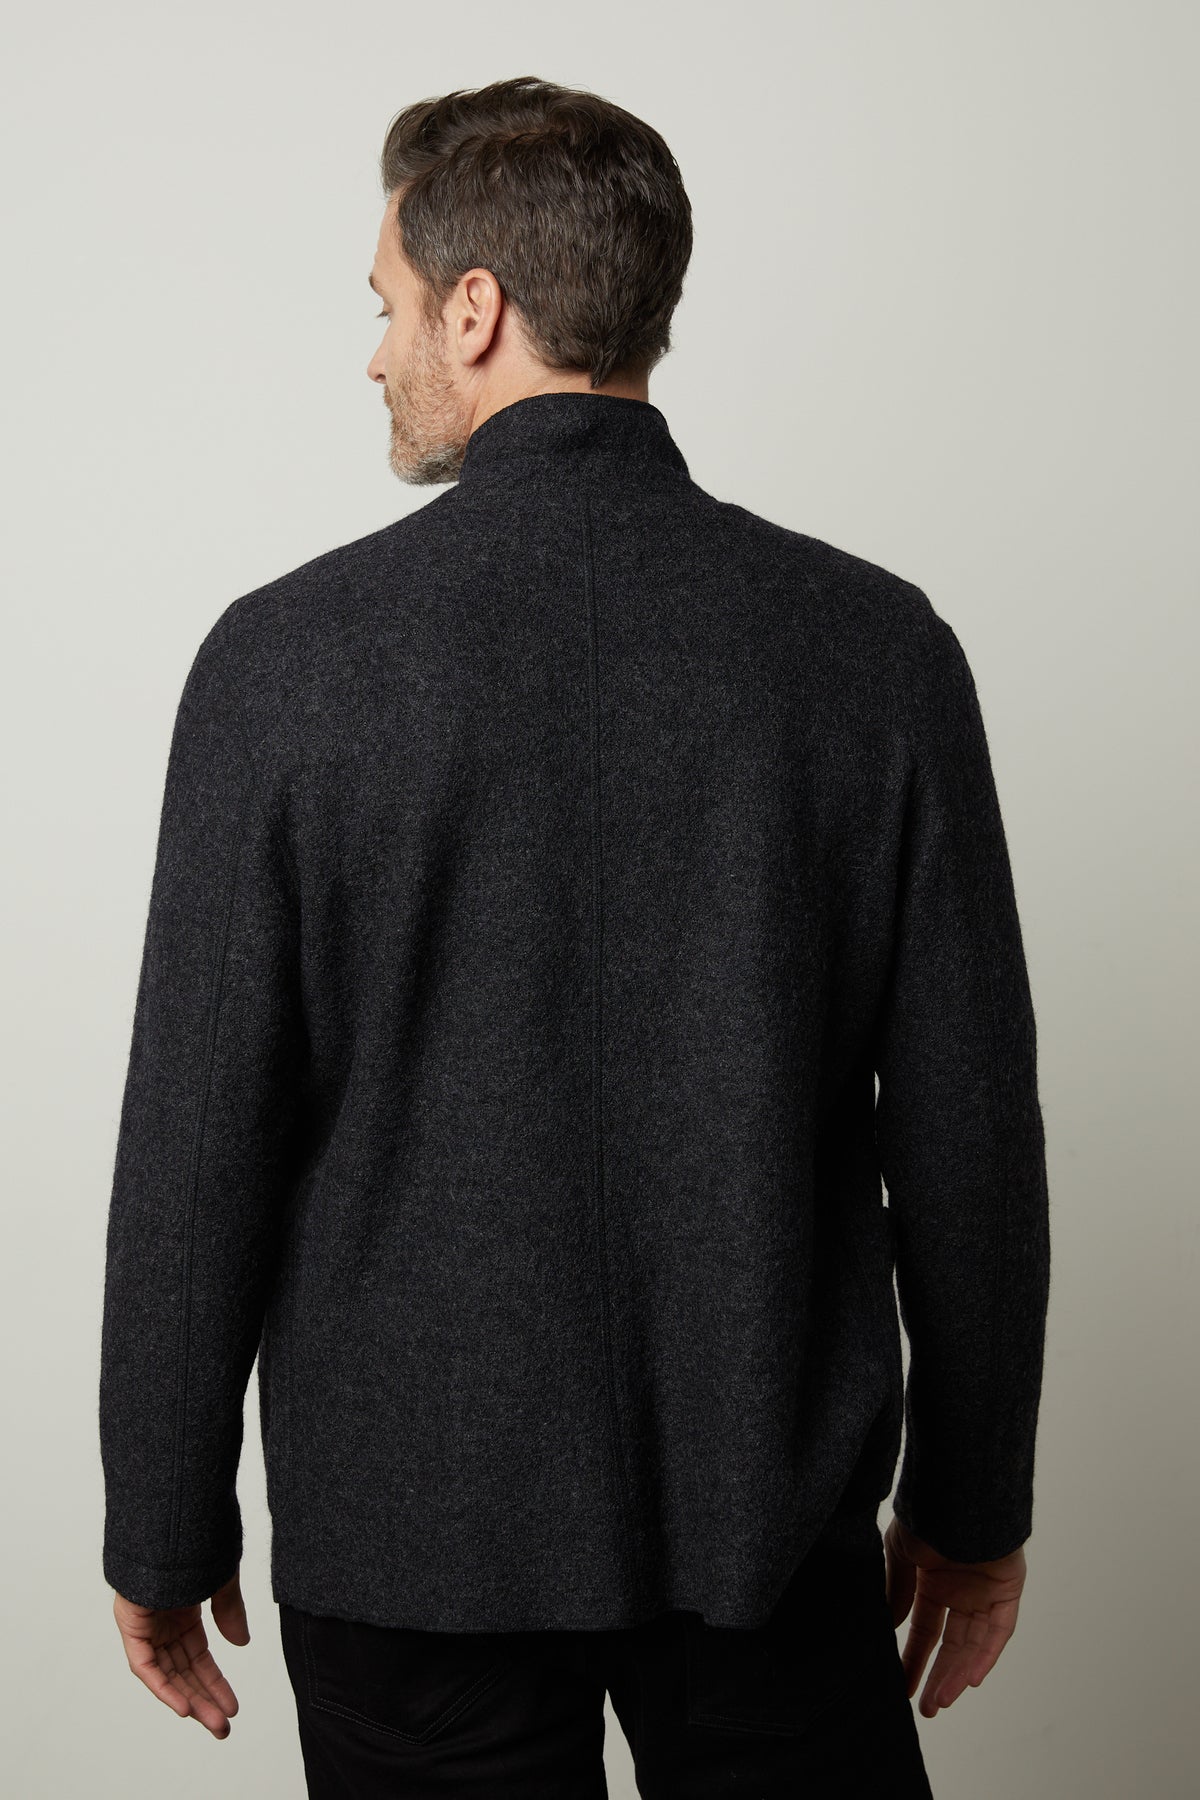 The back view of a man wearing a Velvet by Graham & Spencer BOWEN BOILED WOOL BLEND JACKET.-26846324424897